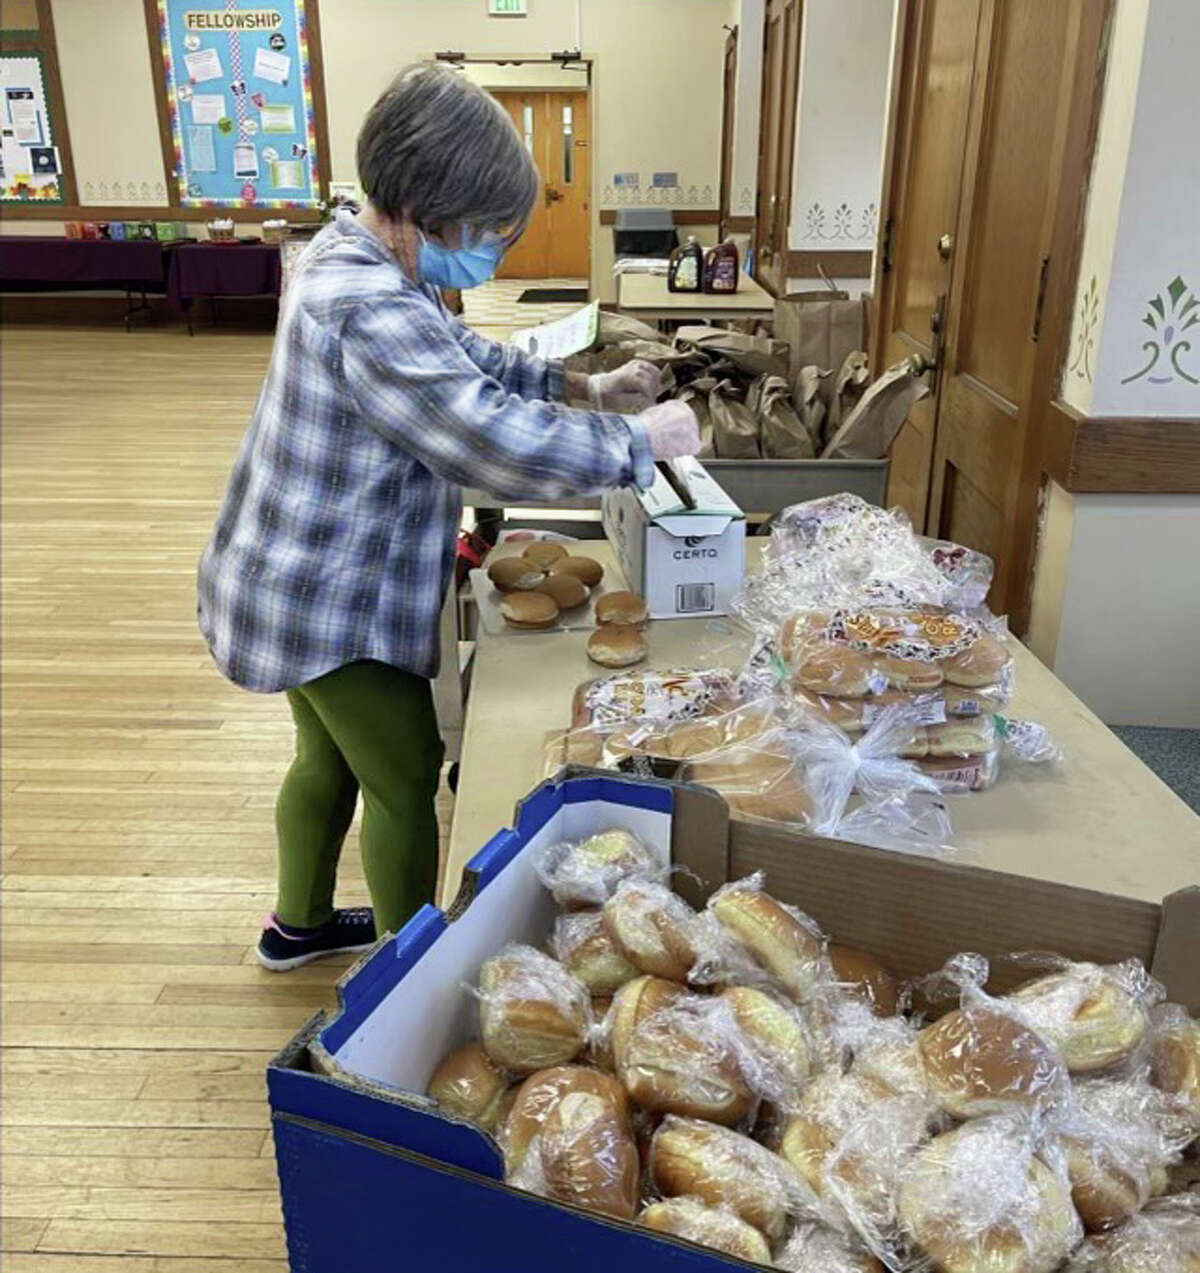 The late Julie Hurlburt, longtime organizer of the annual Christmas Day meal at First Church Middletown, prepares for a past event.